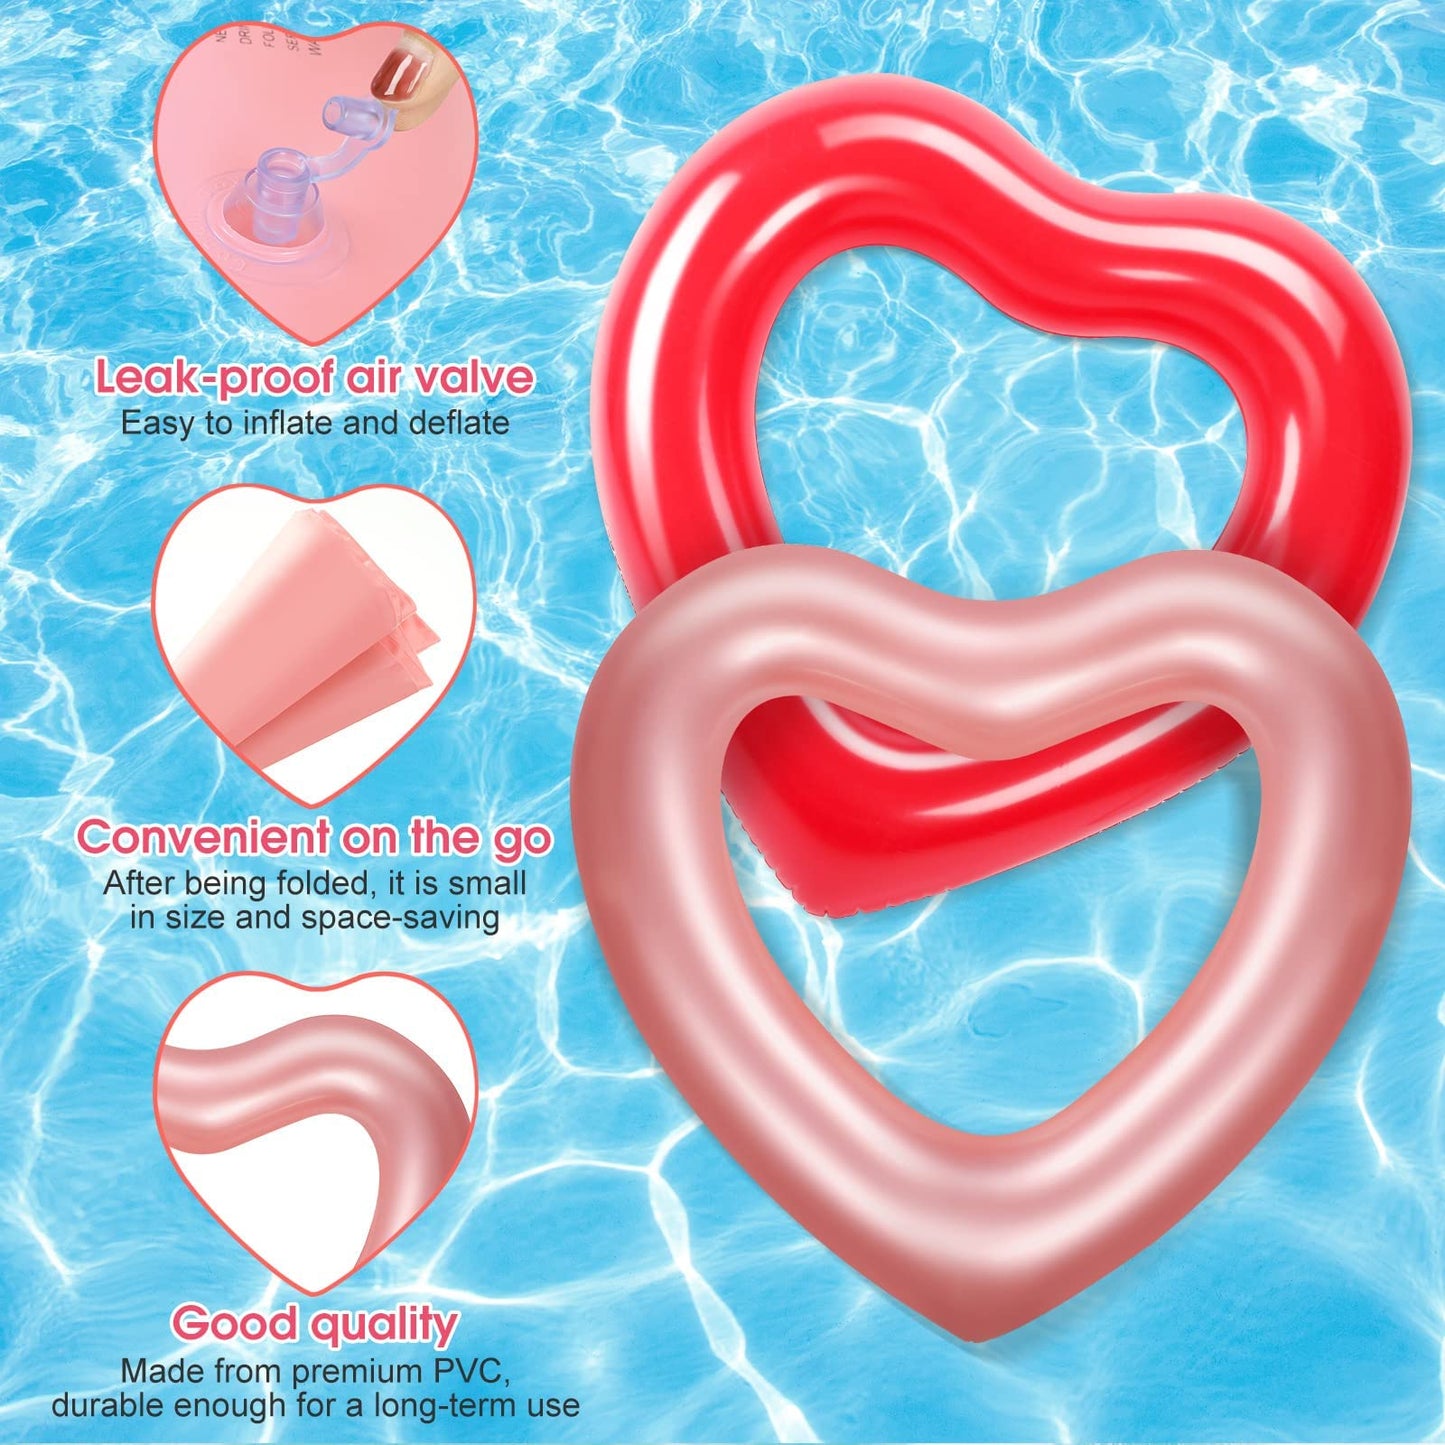 2 Pieces Heart Pool Float, 47.3 x 39.4 Inch Inflatable Swim Rings Bachelorette Party Pool Float Tube, Heart Shaped Summer Swimming Ring, Water Fun Beach Party for Adults (Rose Gold, Bright Red)